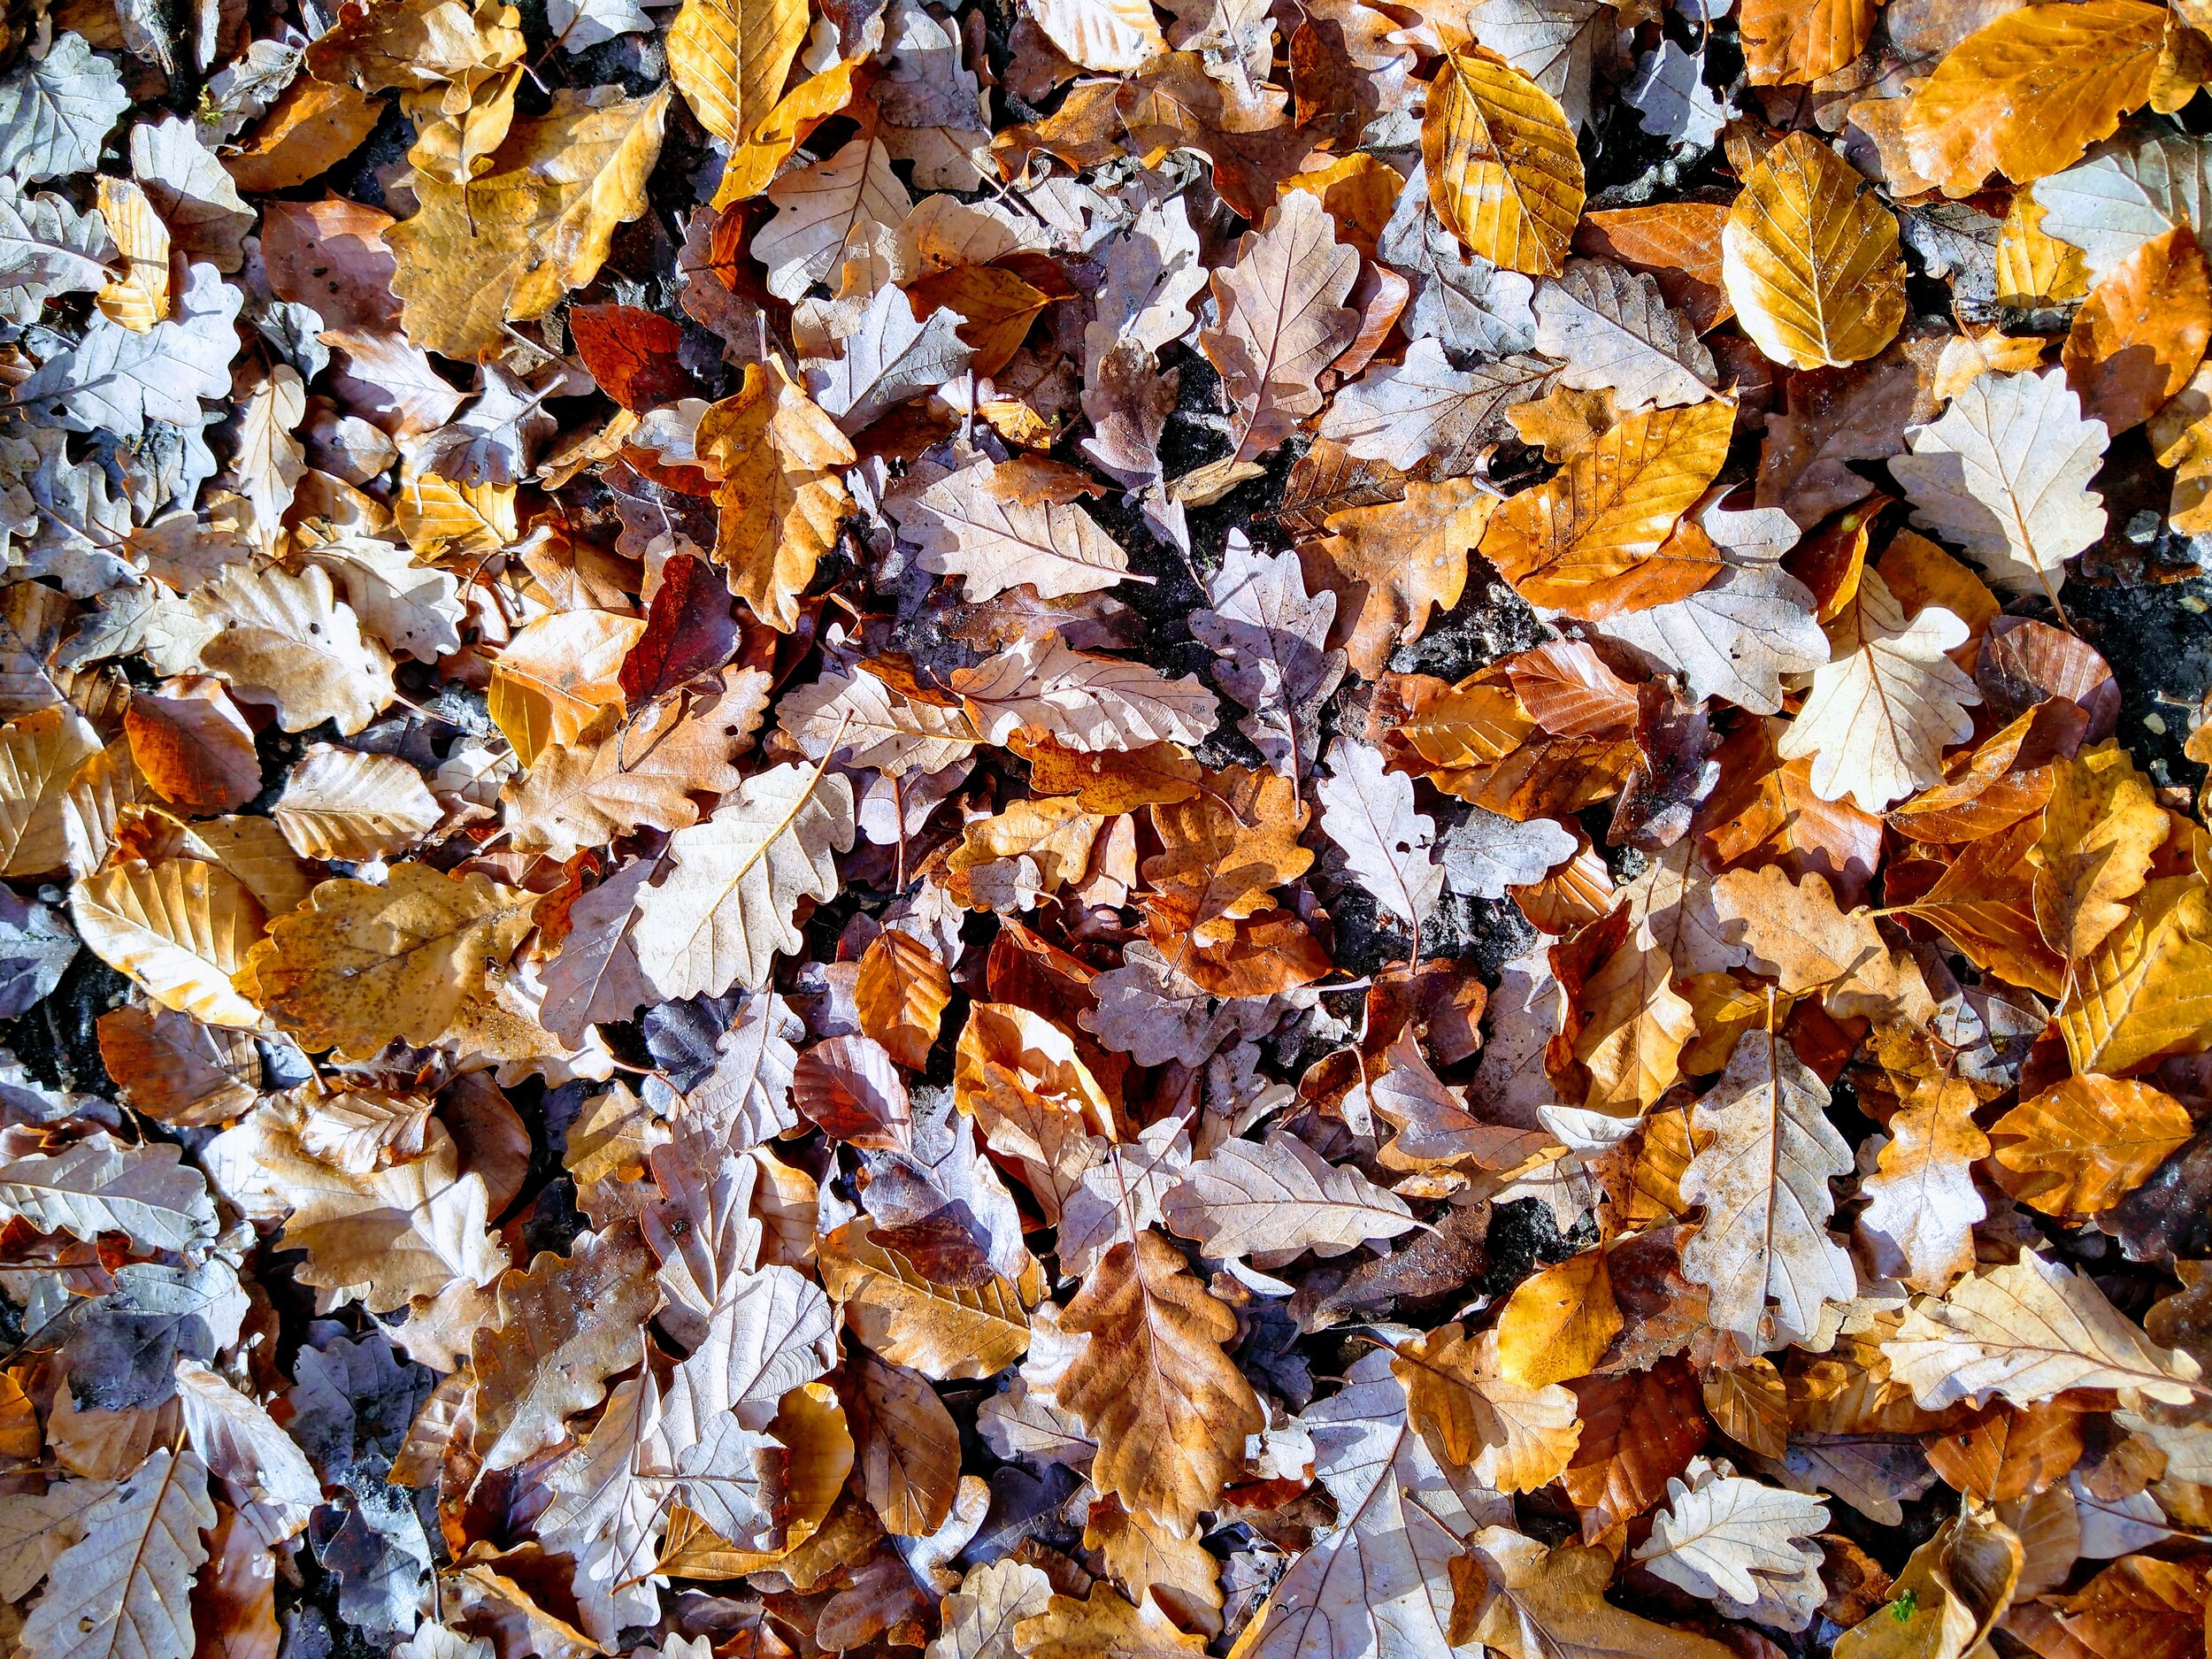 Fallen leaves on the forest floor